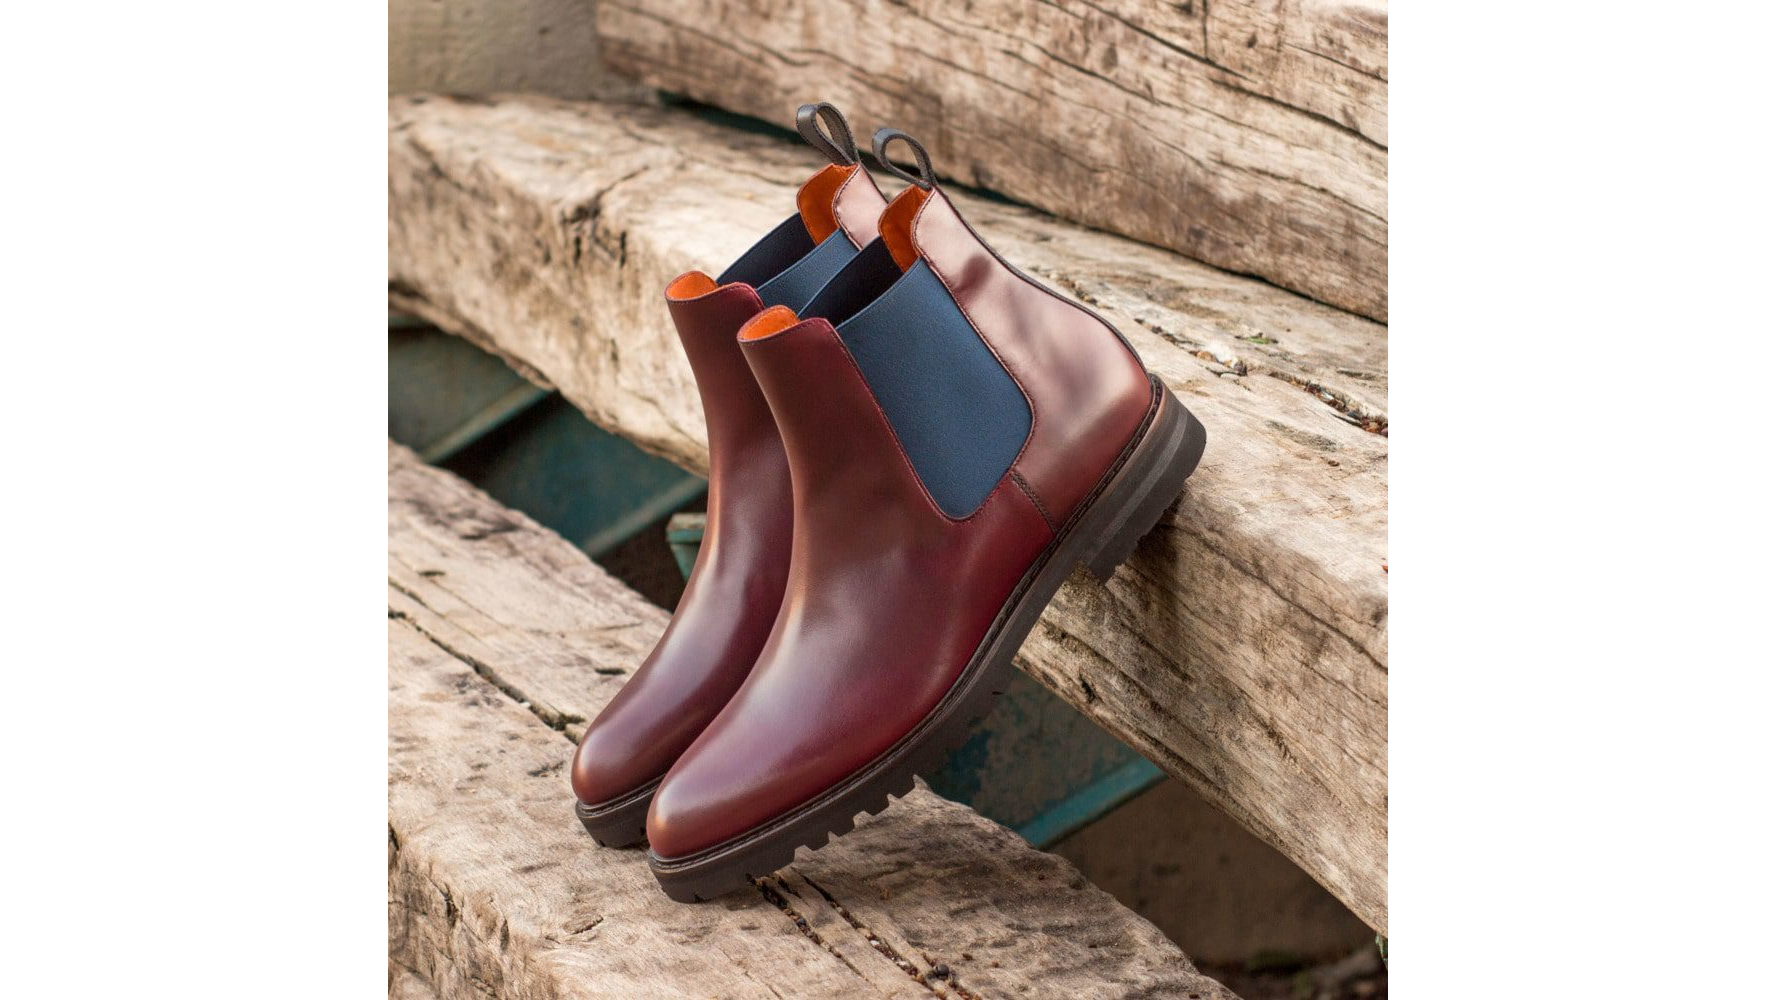 Handcrafted Men's Genuine Python Leather Chelsea Boots Are Made to Order